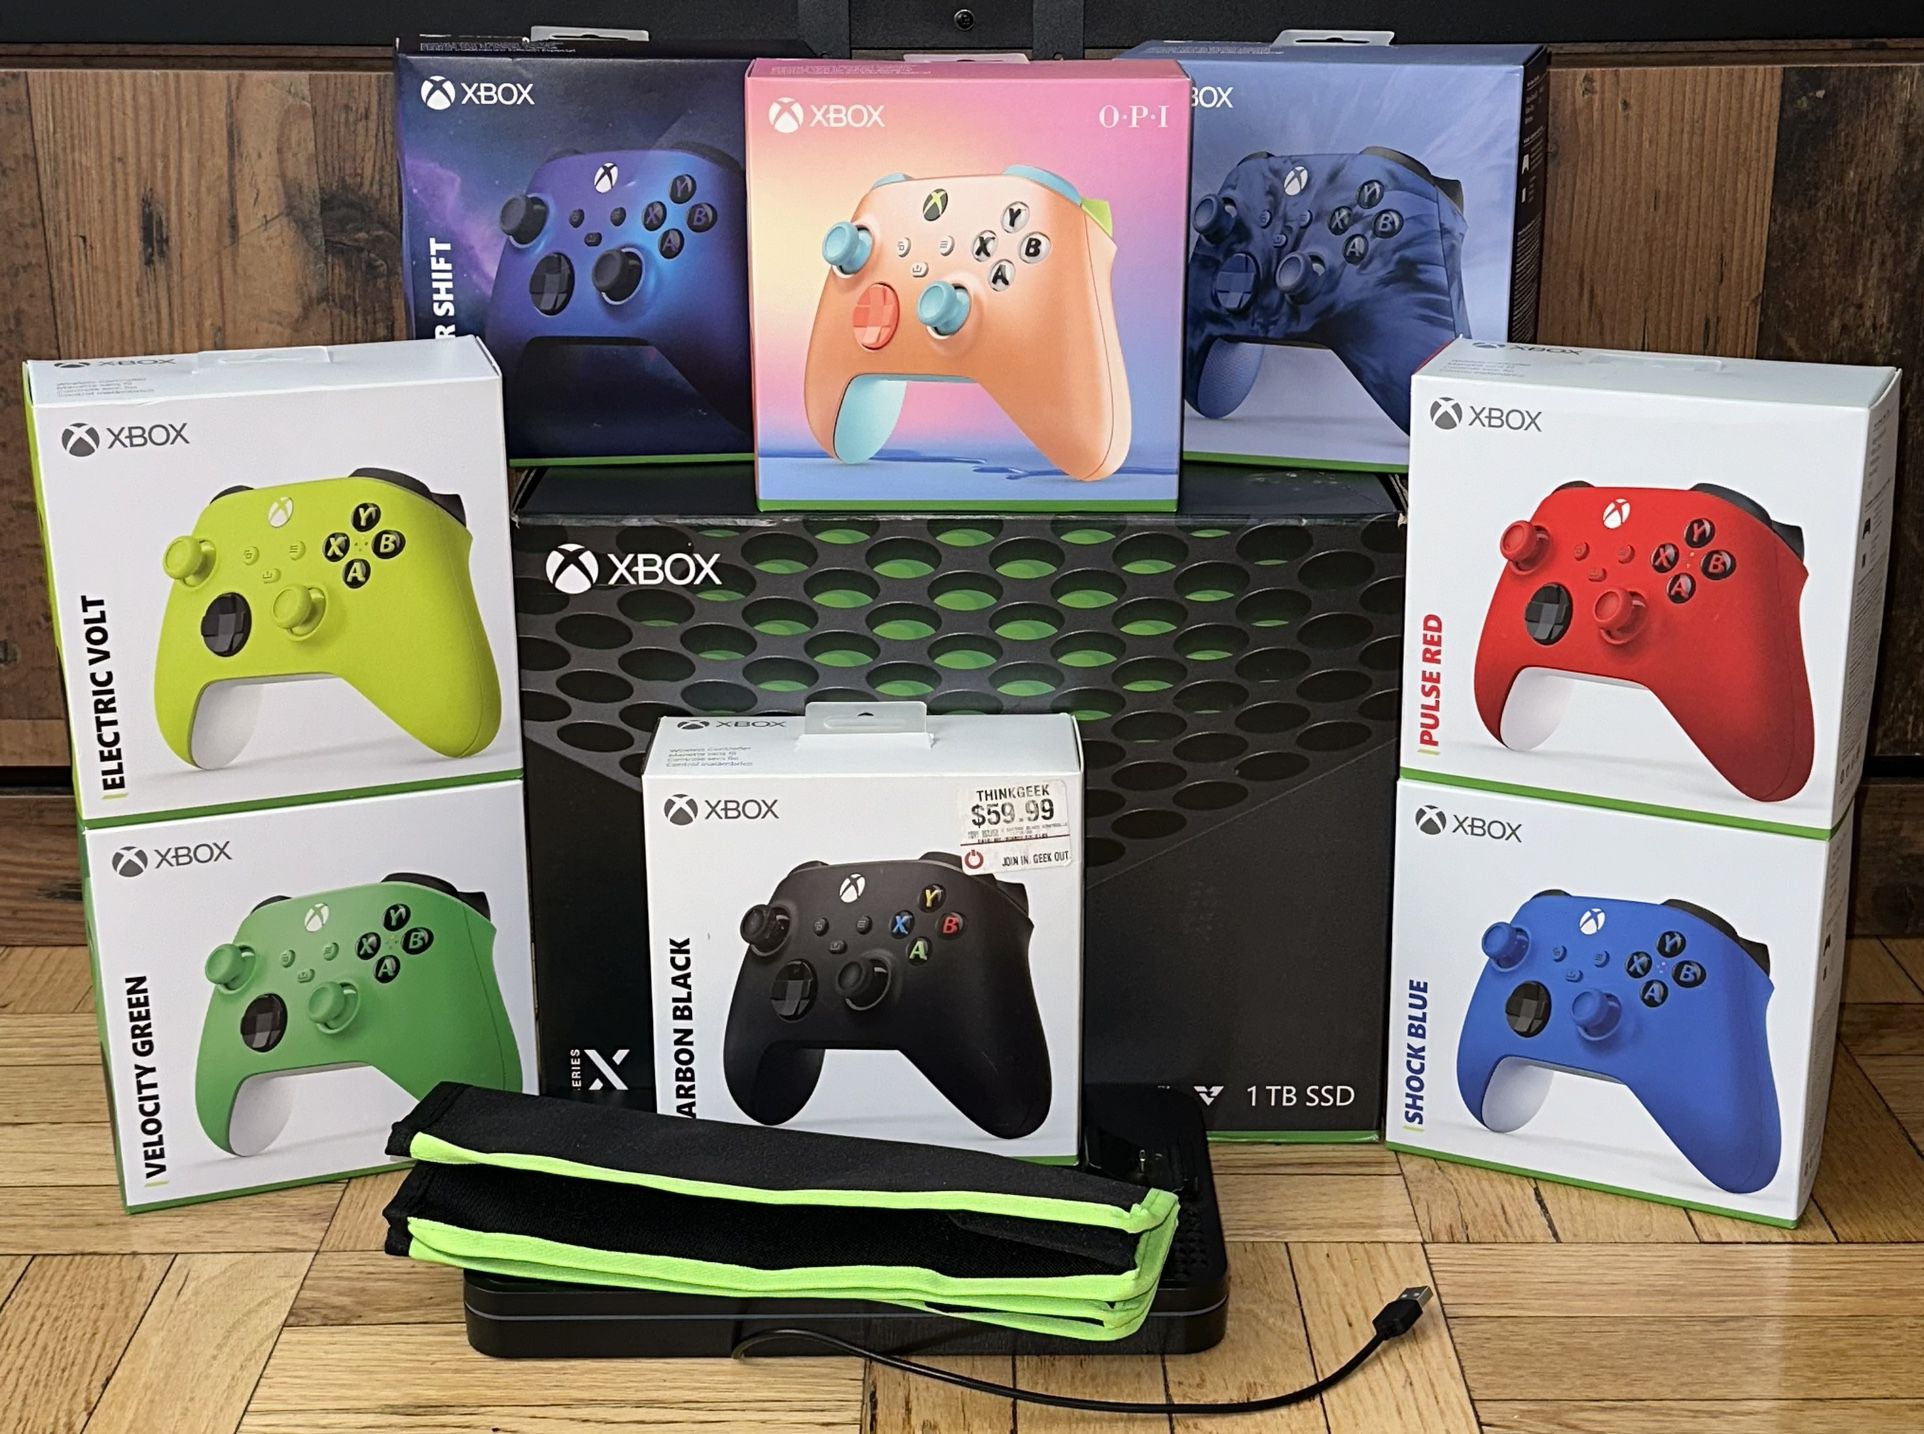 X-box Series X 1TB + 8 Controllers, Dust Cover & More!